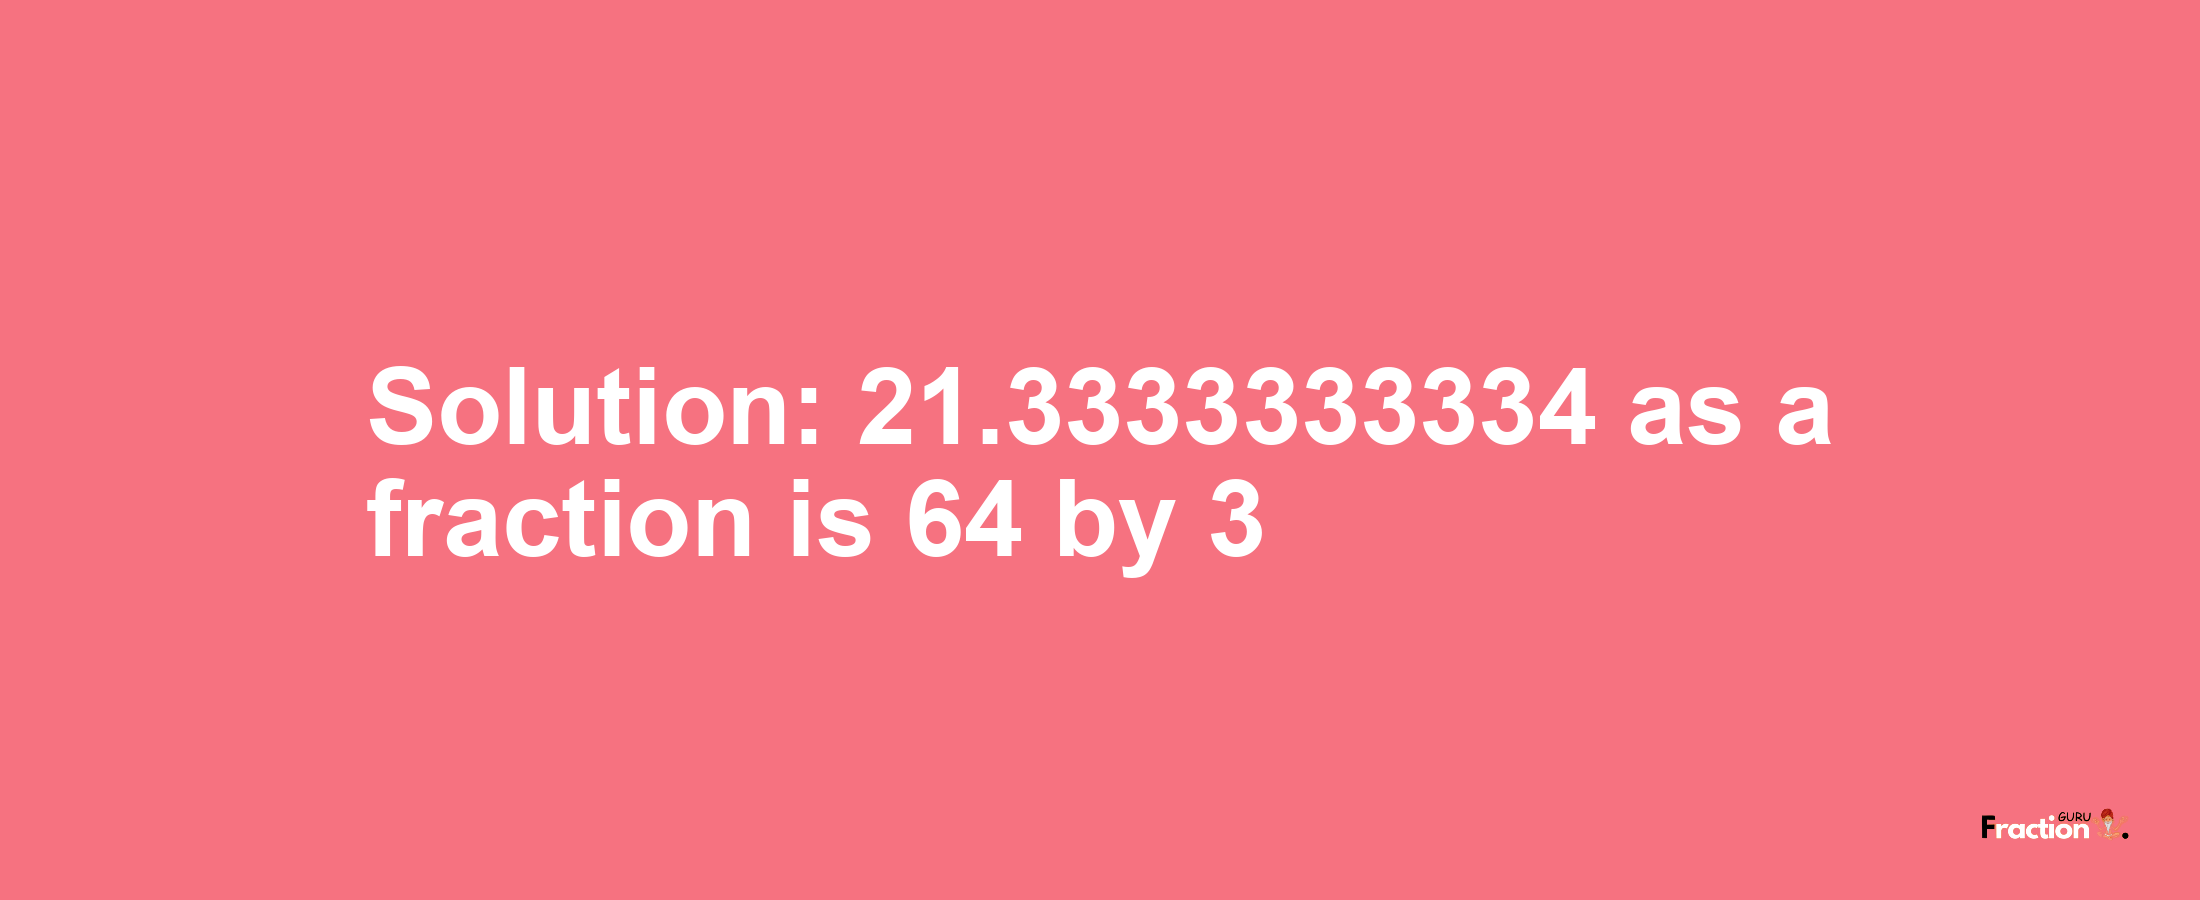 Solution:21.3333333334 as a fraction is 64/3